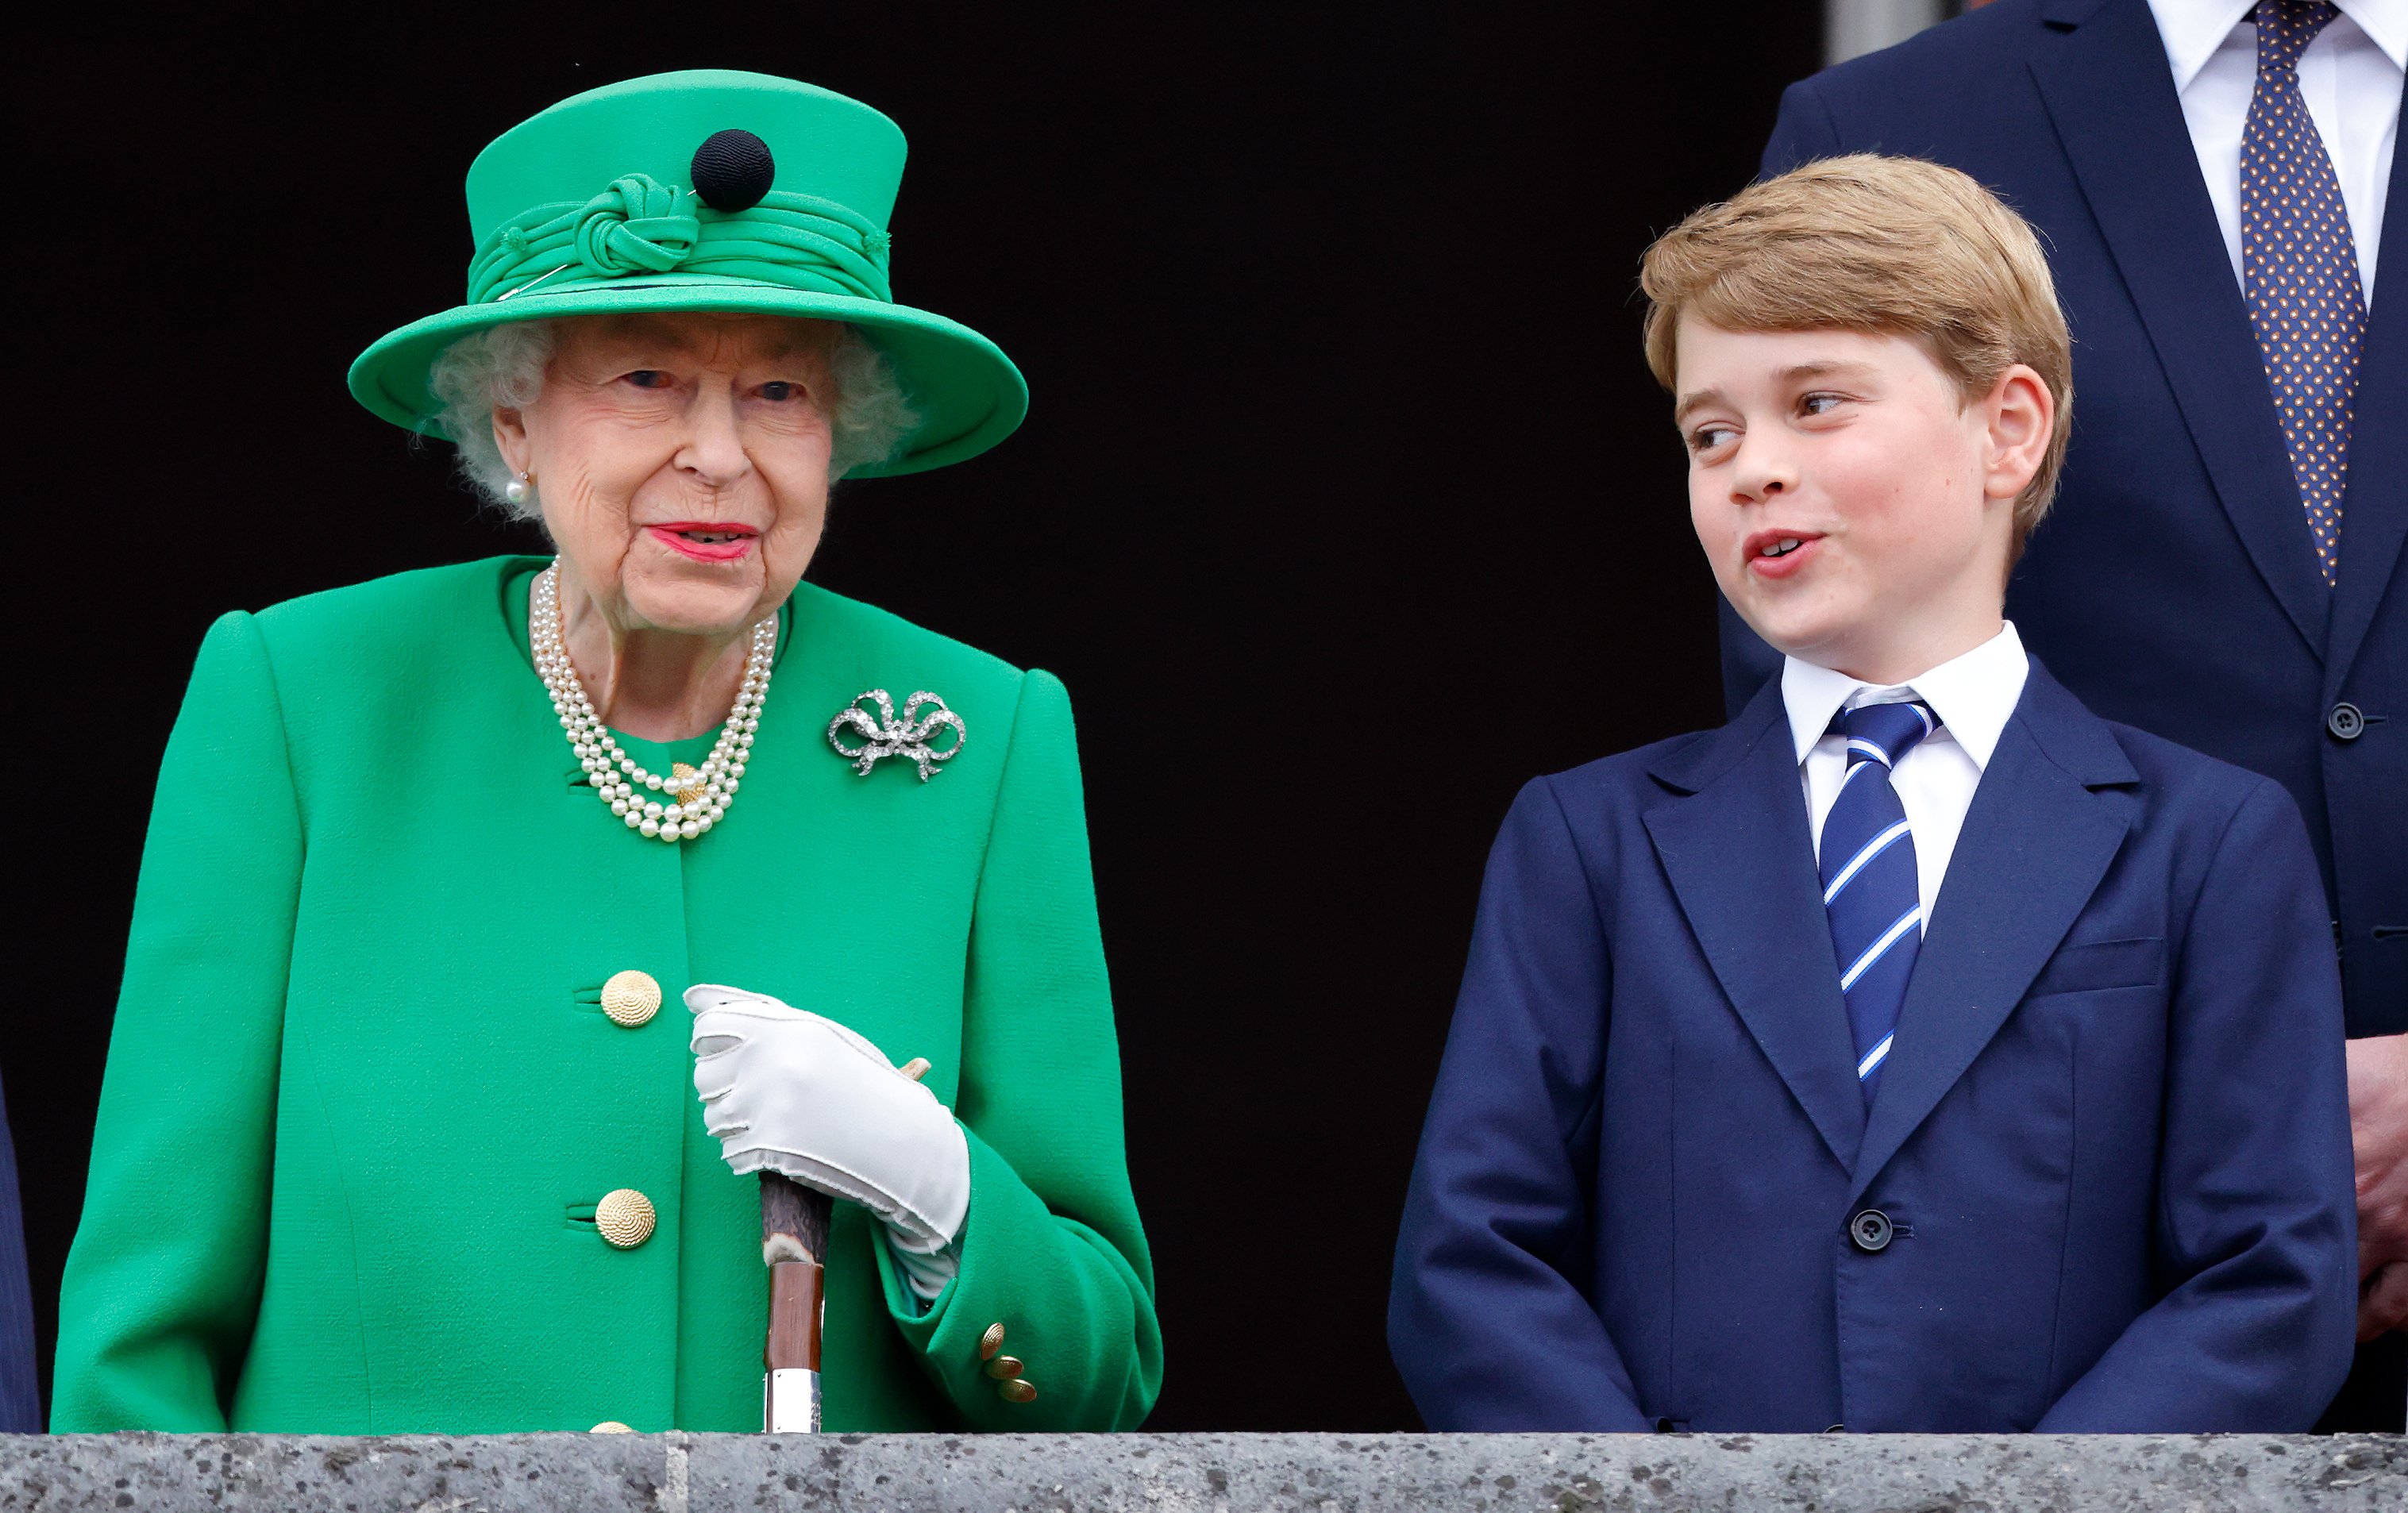 Queen Elizabeth II and Prince George pictured standing on the balcony of Buckingham Palace following the Platinum Pageant on June 5, 2022 in London, England | Source: Getty Images